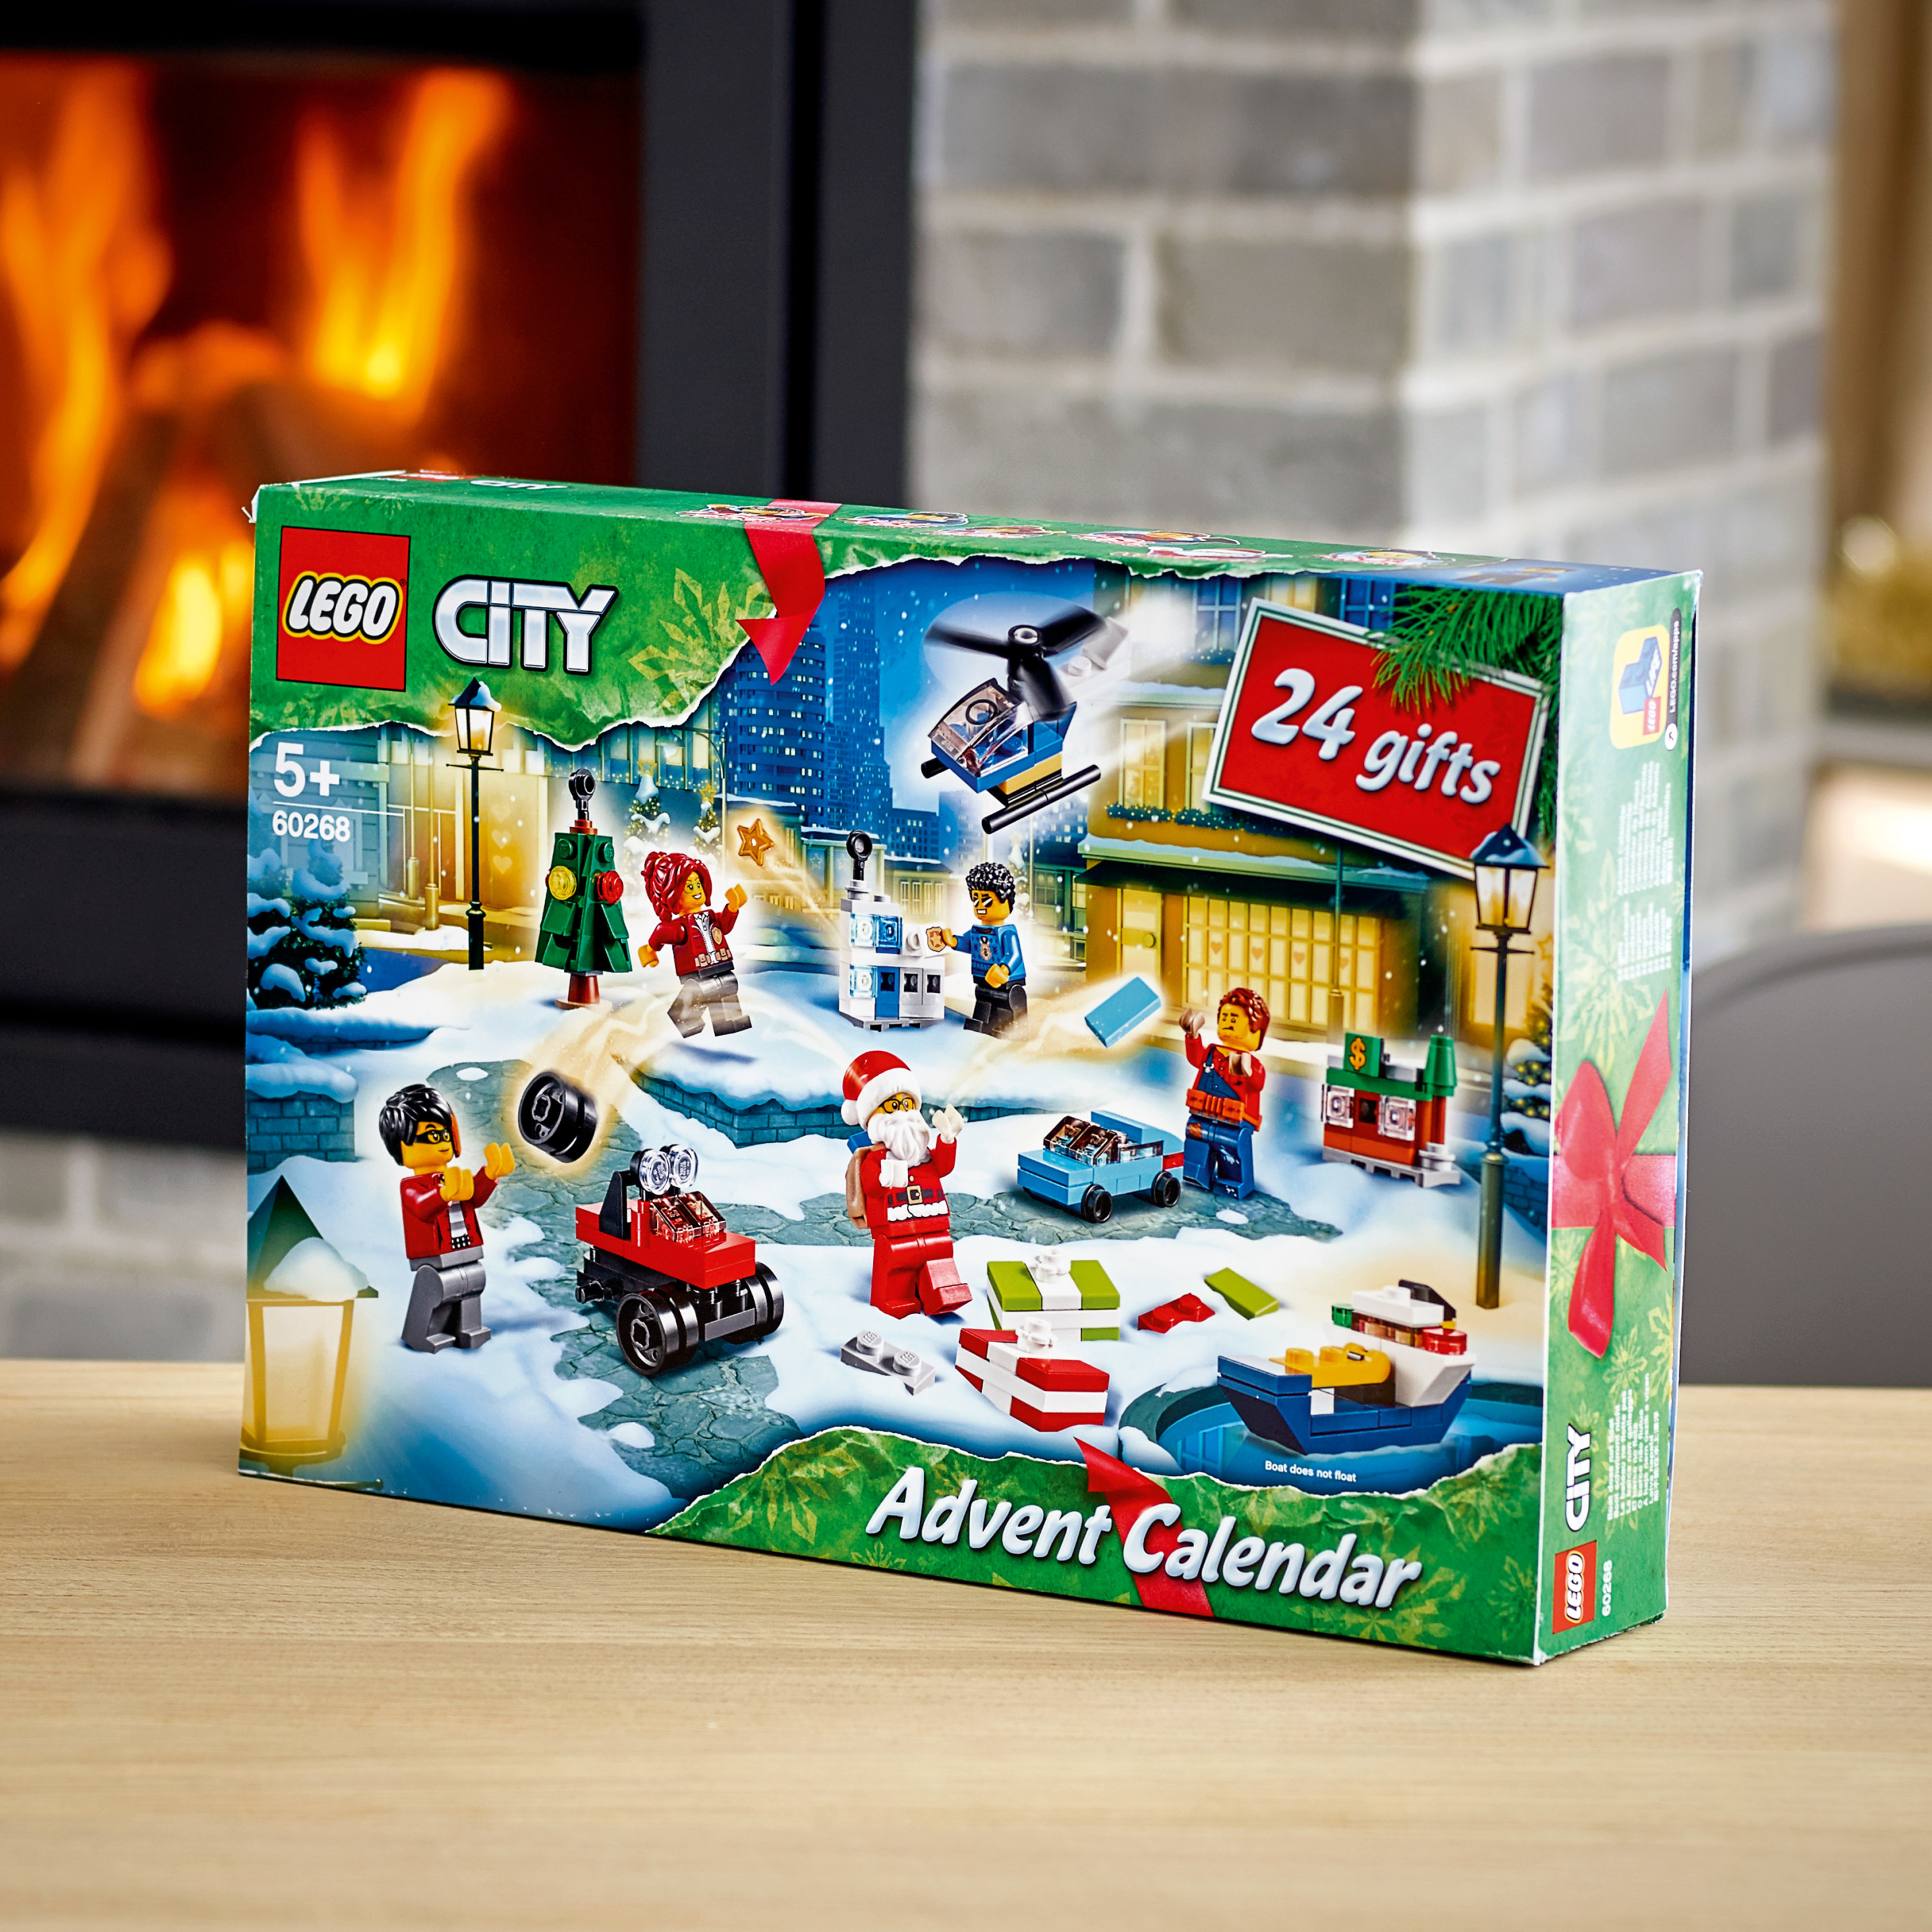 LEGO City Advent Calendar 60268, With City Play Mat, Best Festive Toys for Kids (342 Pieces) - image 7 of 7